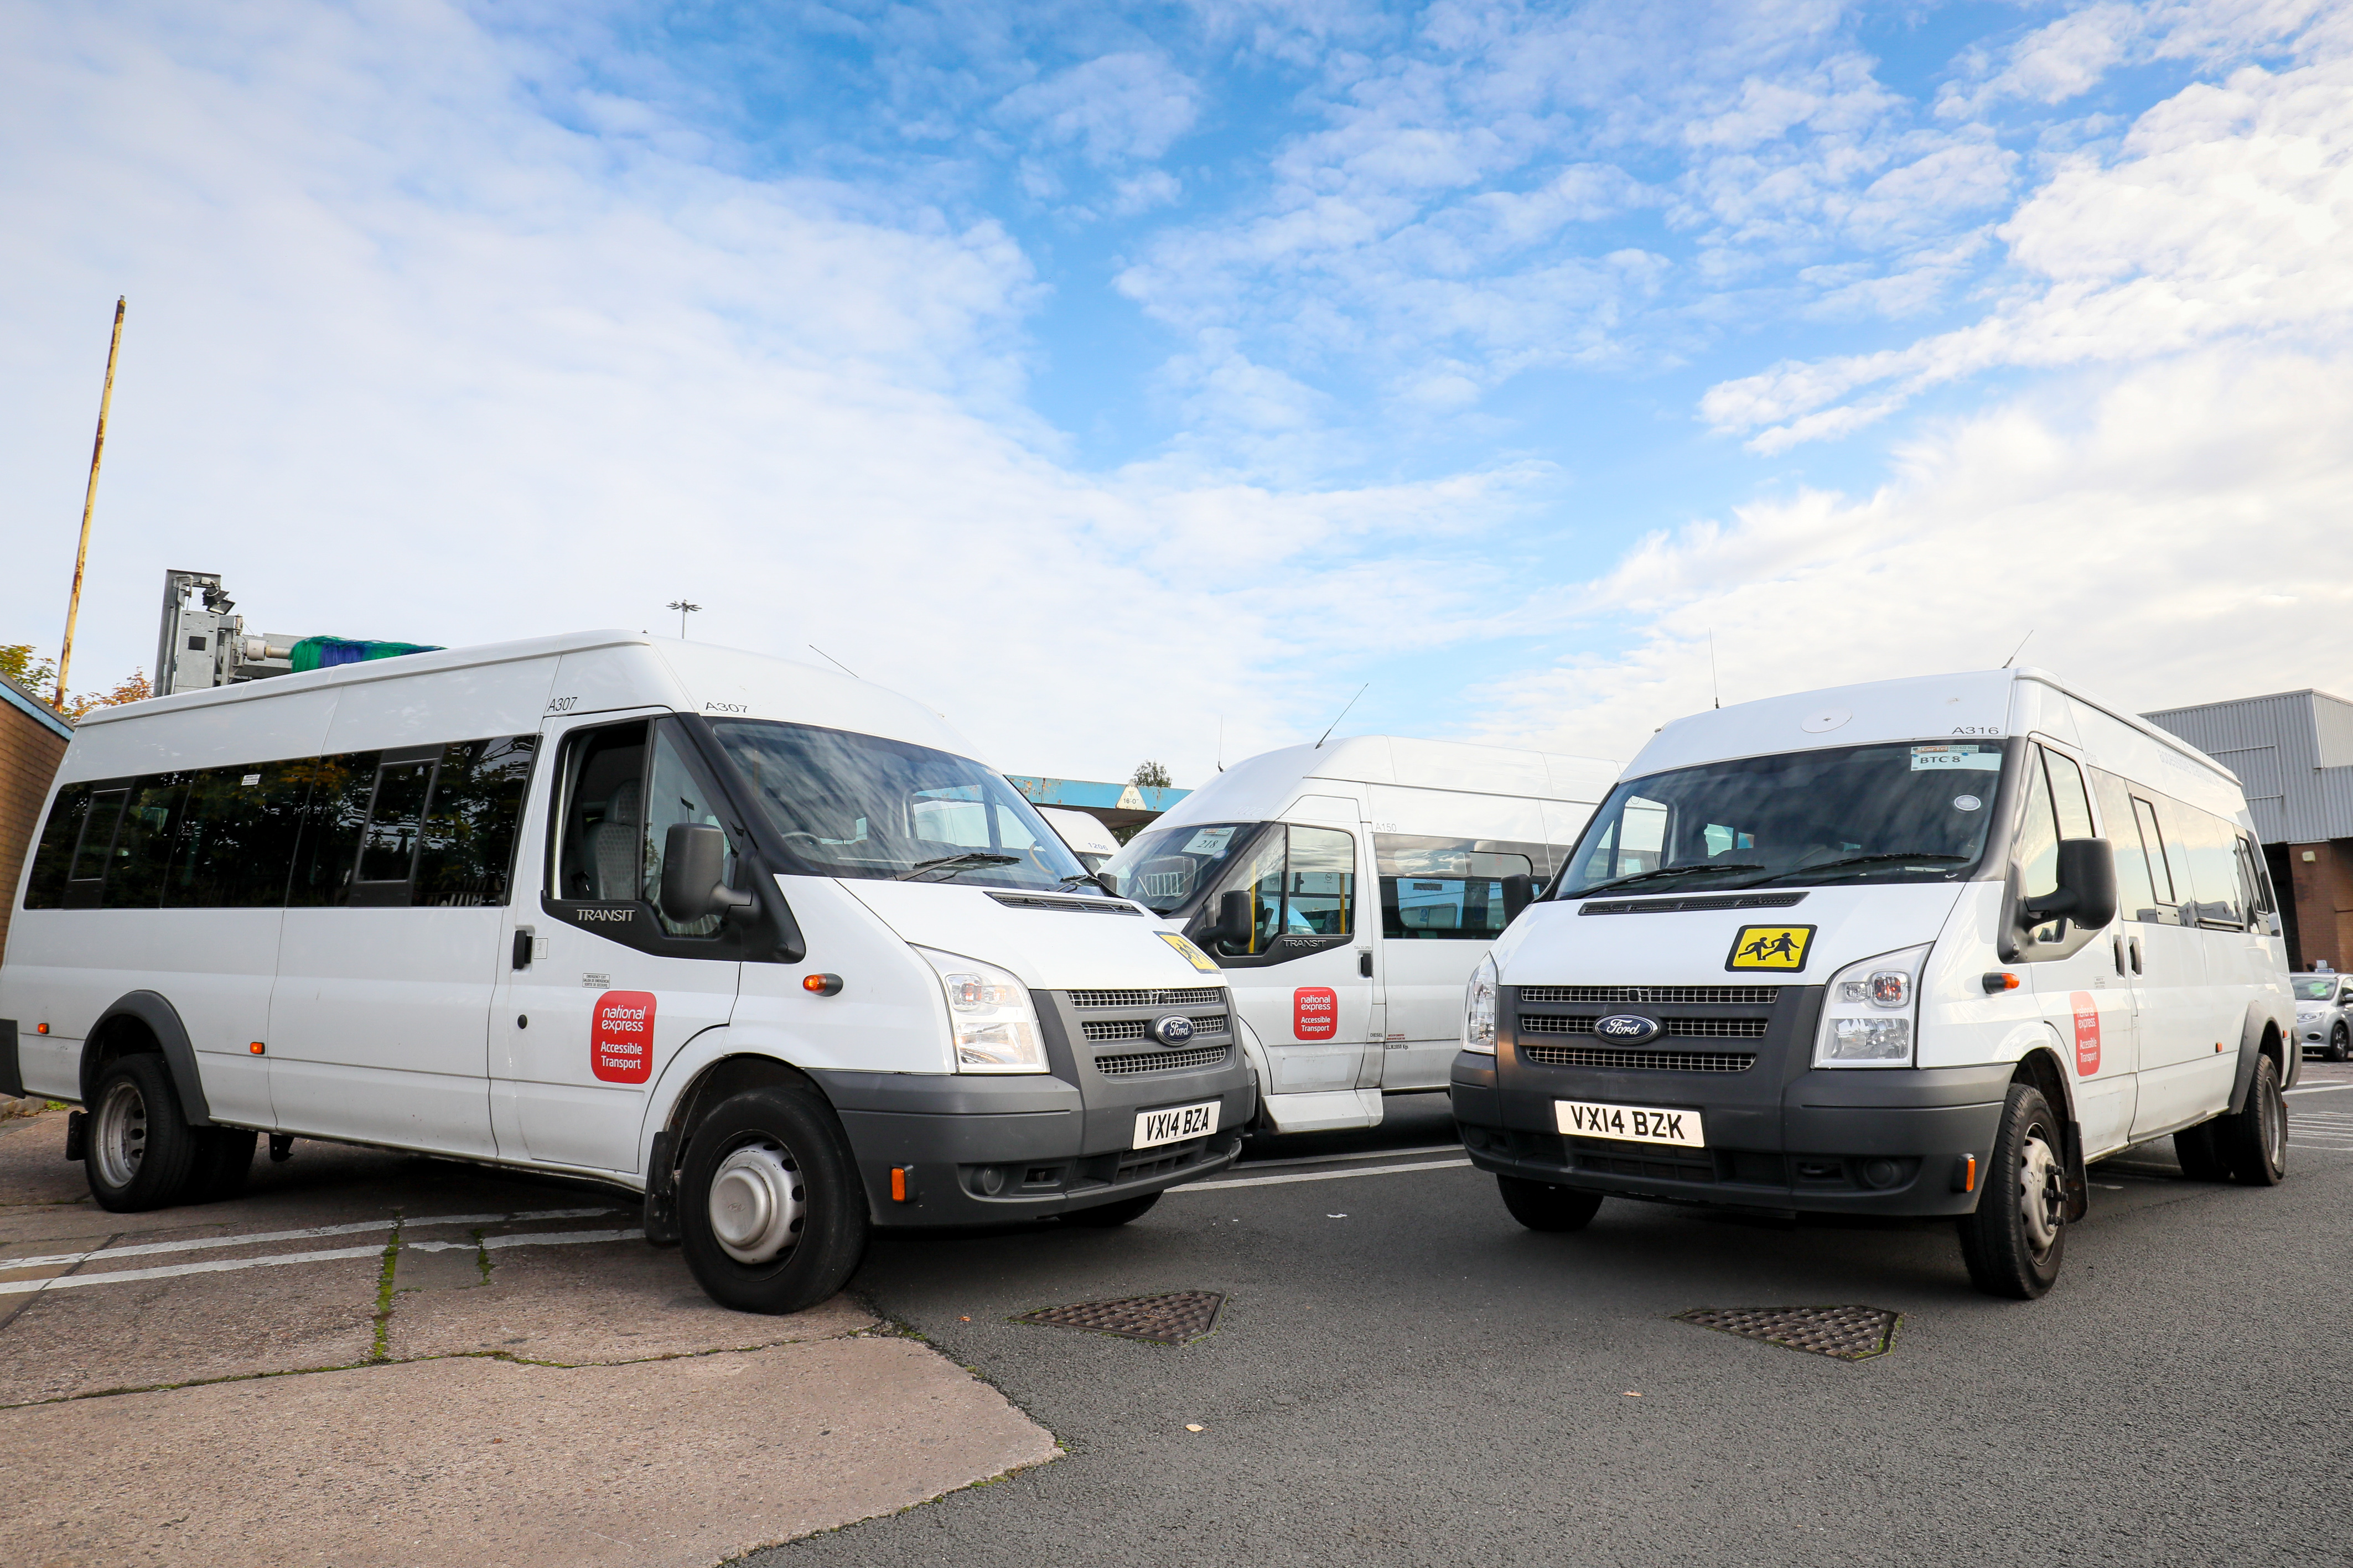 New free shuttle bus service for NHS and social care staff launched in response to coronavirus outbreak